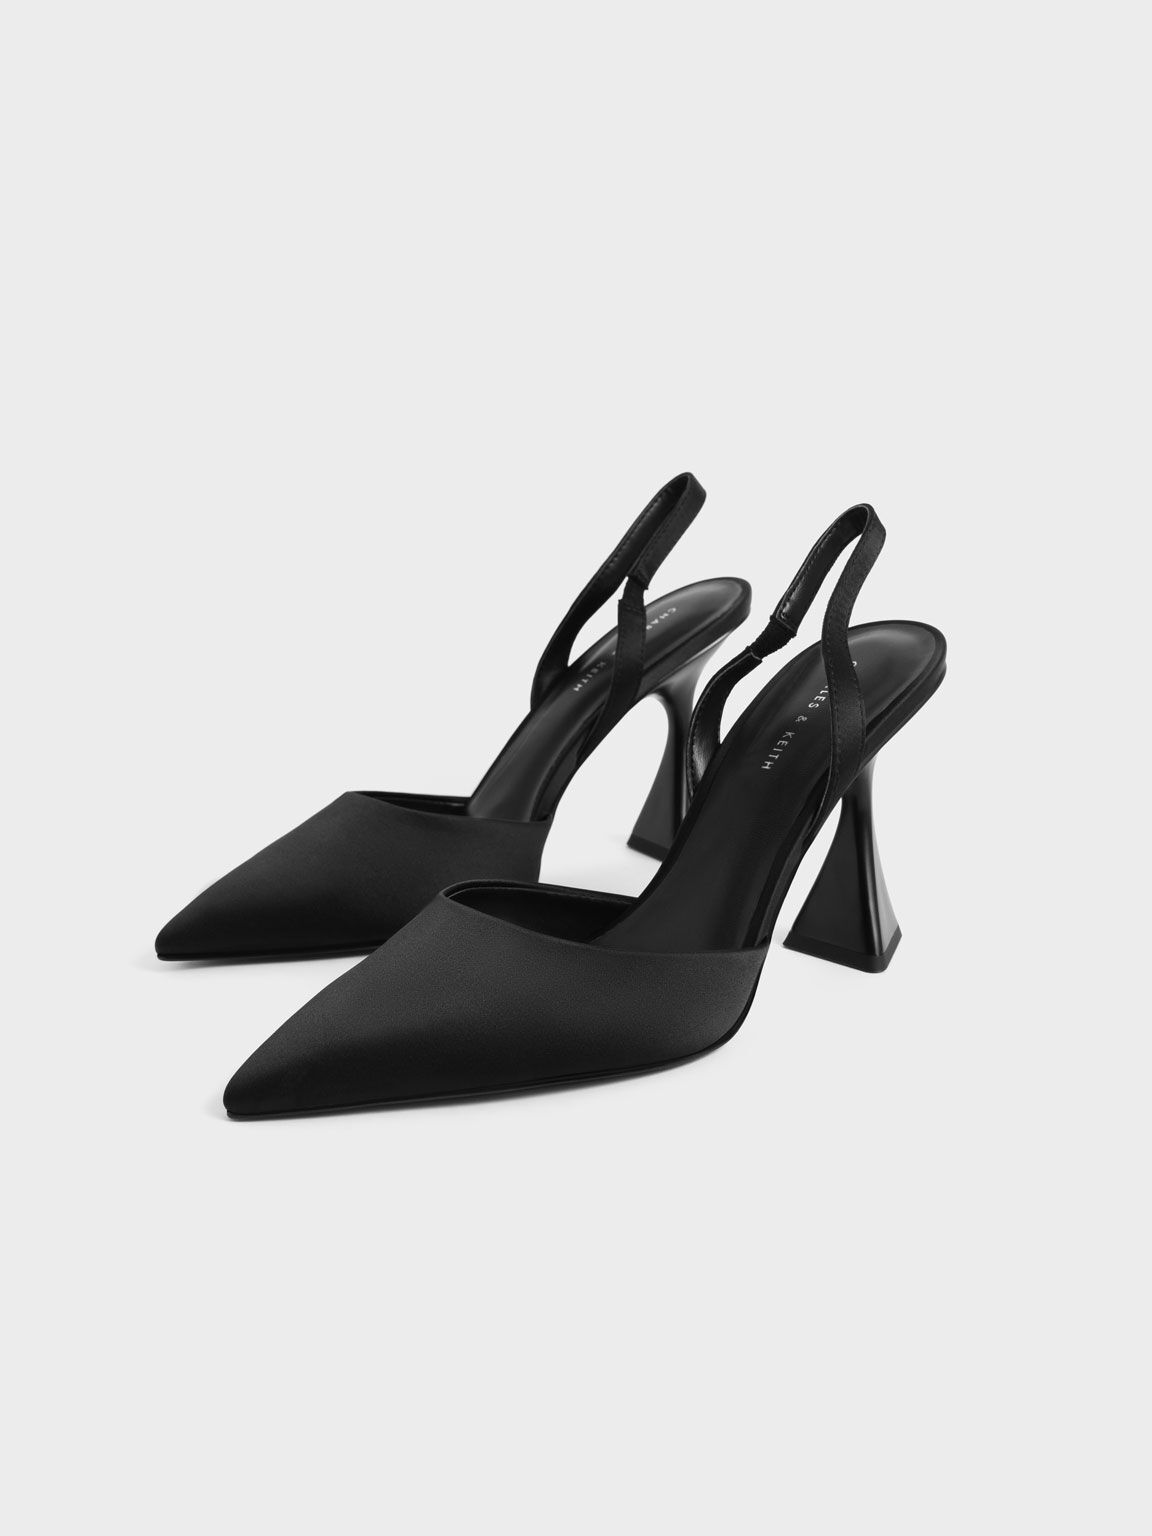 Recycled Polyester Slingback Pumps, Black, hi-res